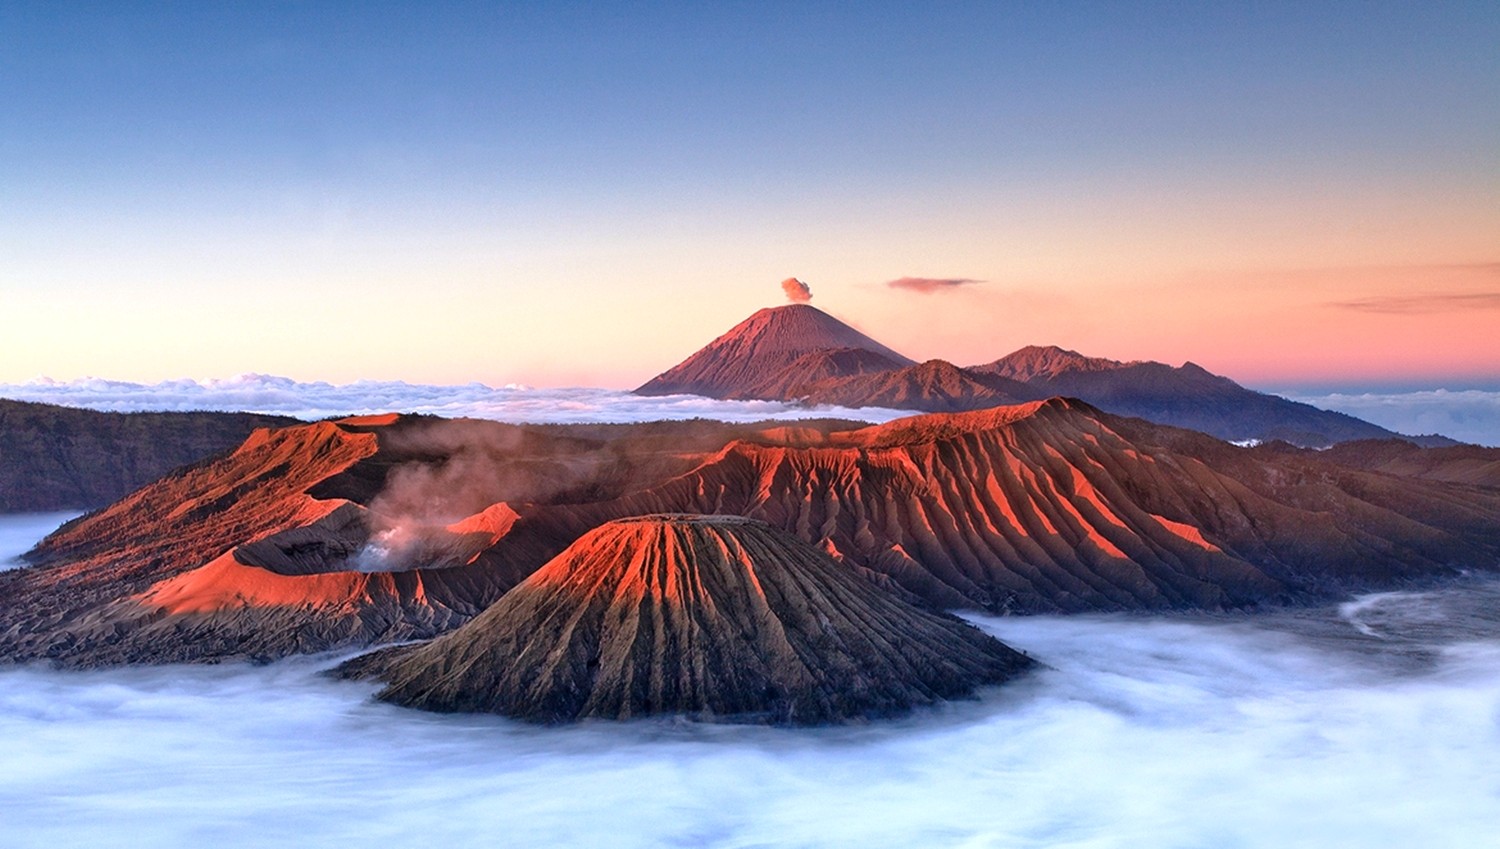 General 1500x849 nature landscape mountains volcano clouds mist crater Mount Bromo Indonesia sunlight Java (island)